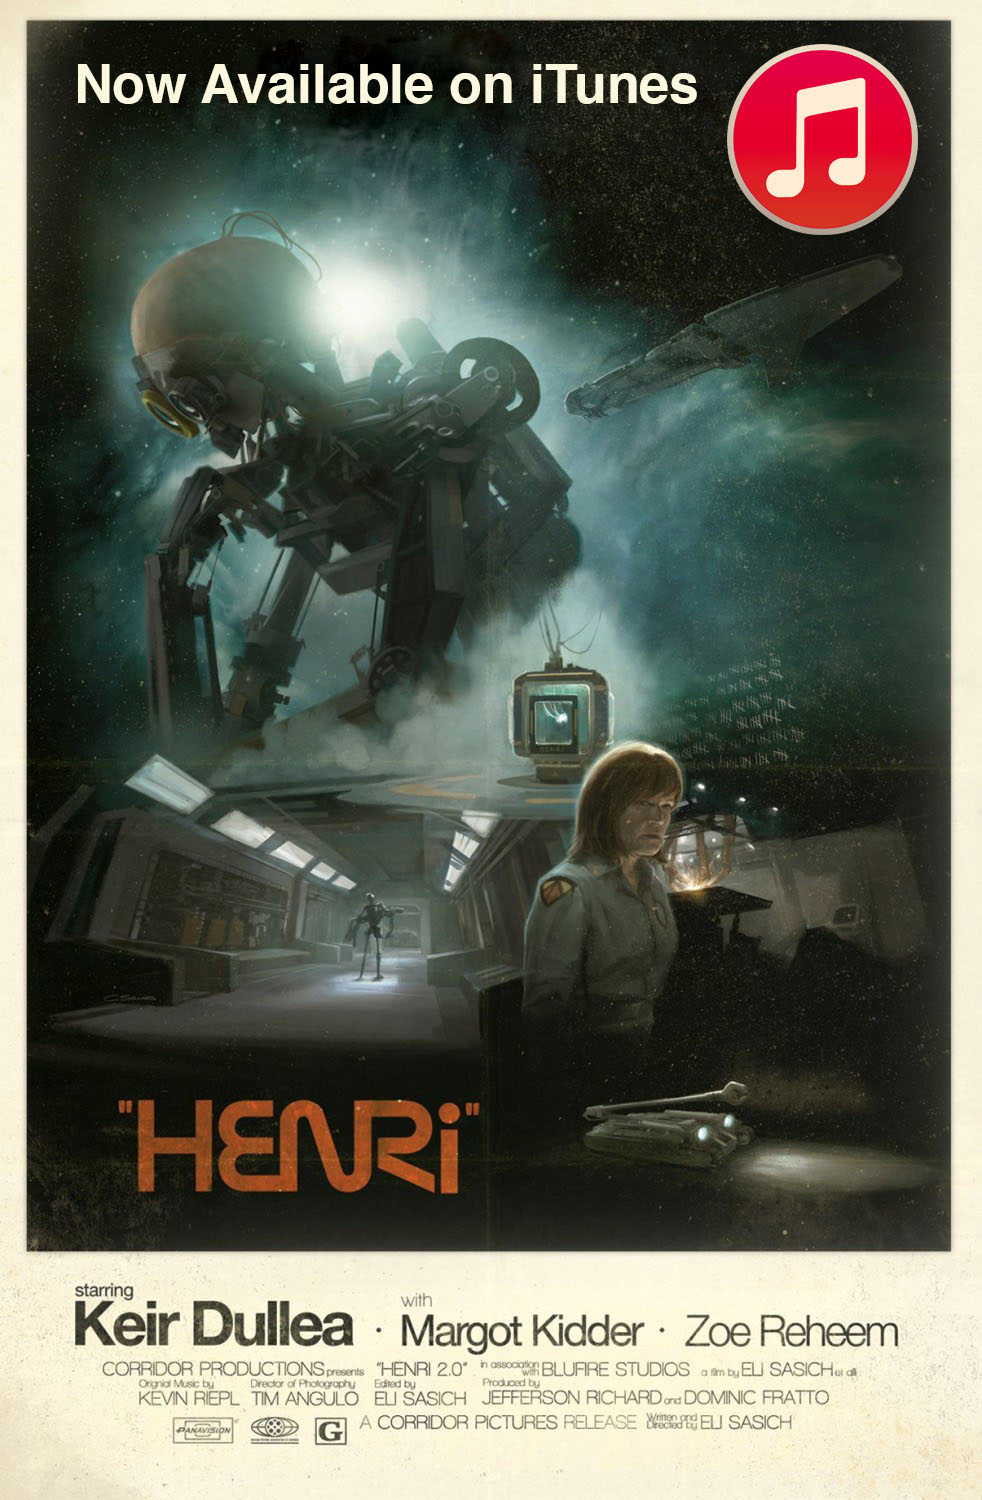 HENRi Film available on iTunes